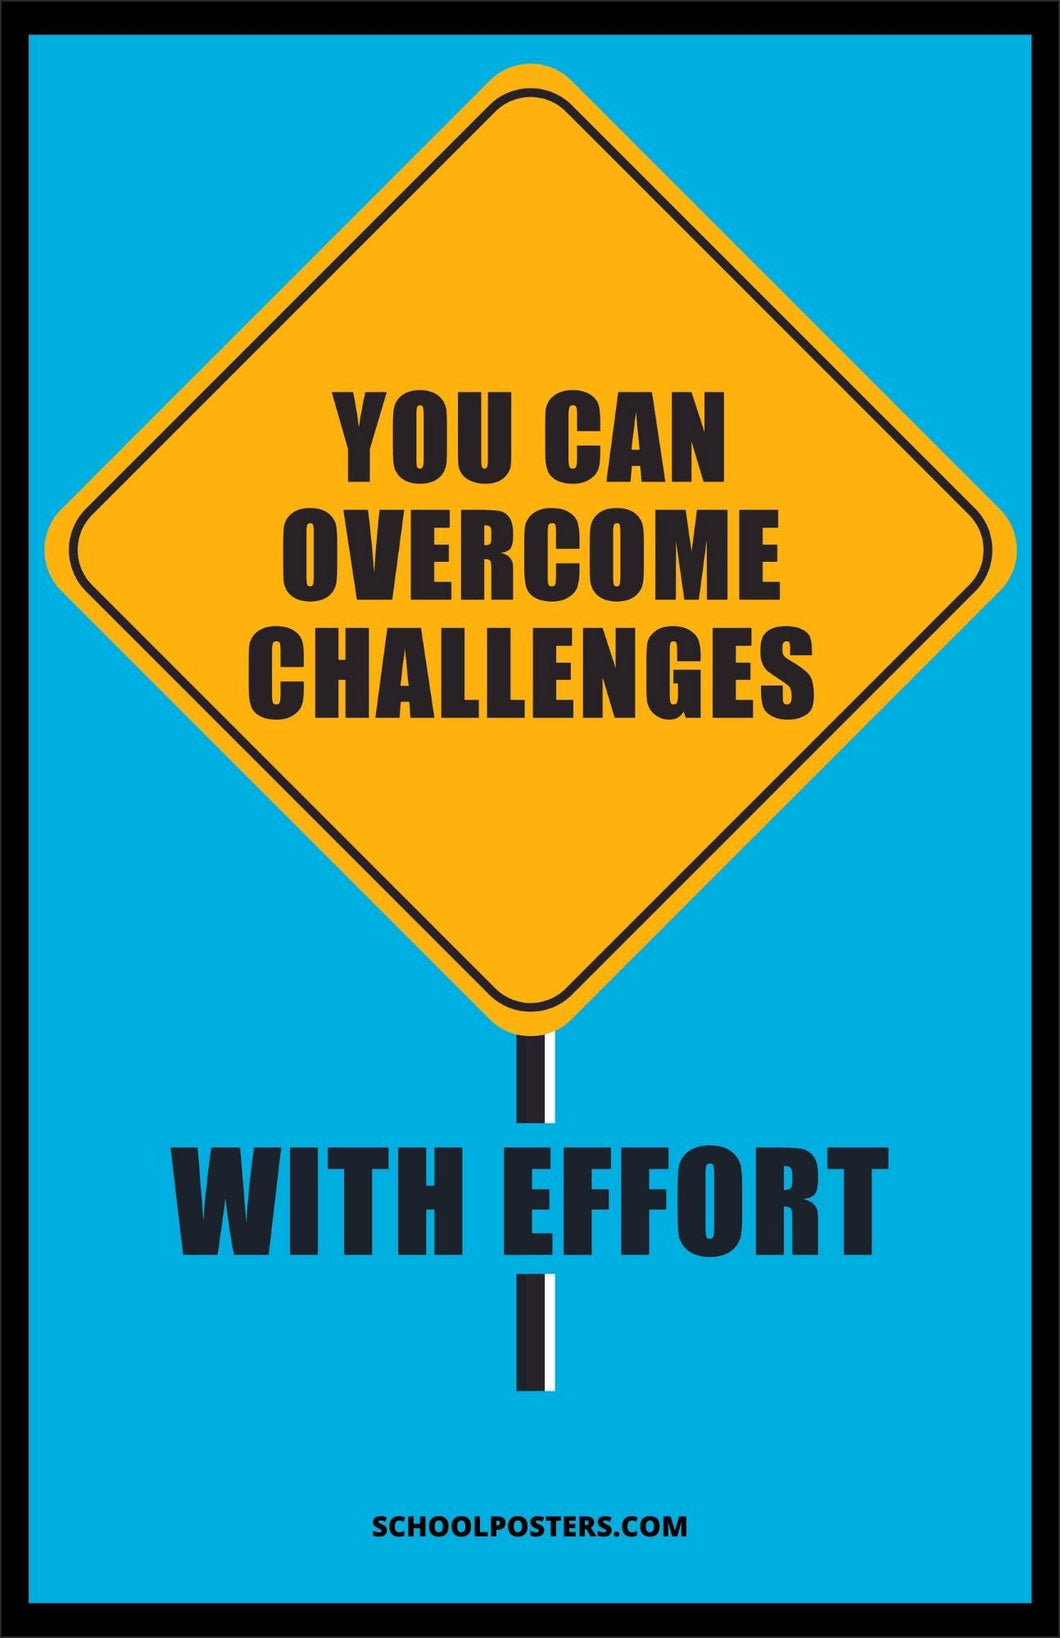 Overcome Challenges With Effort Poster